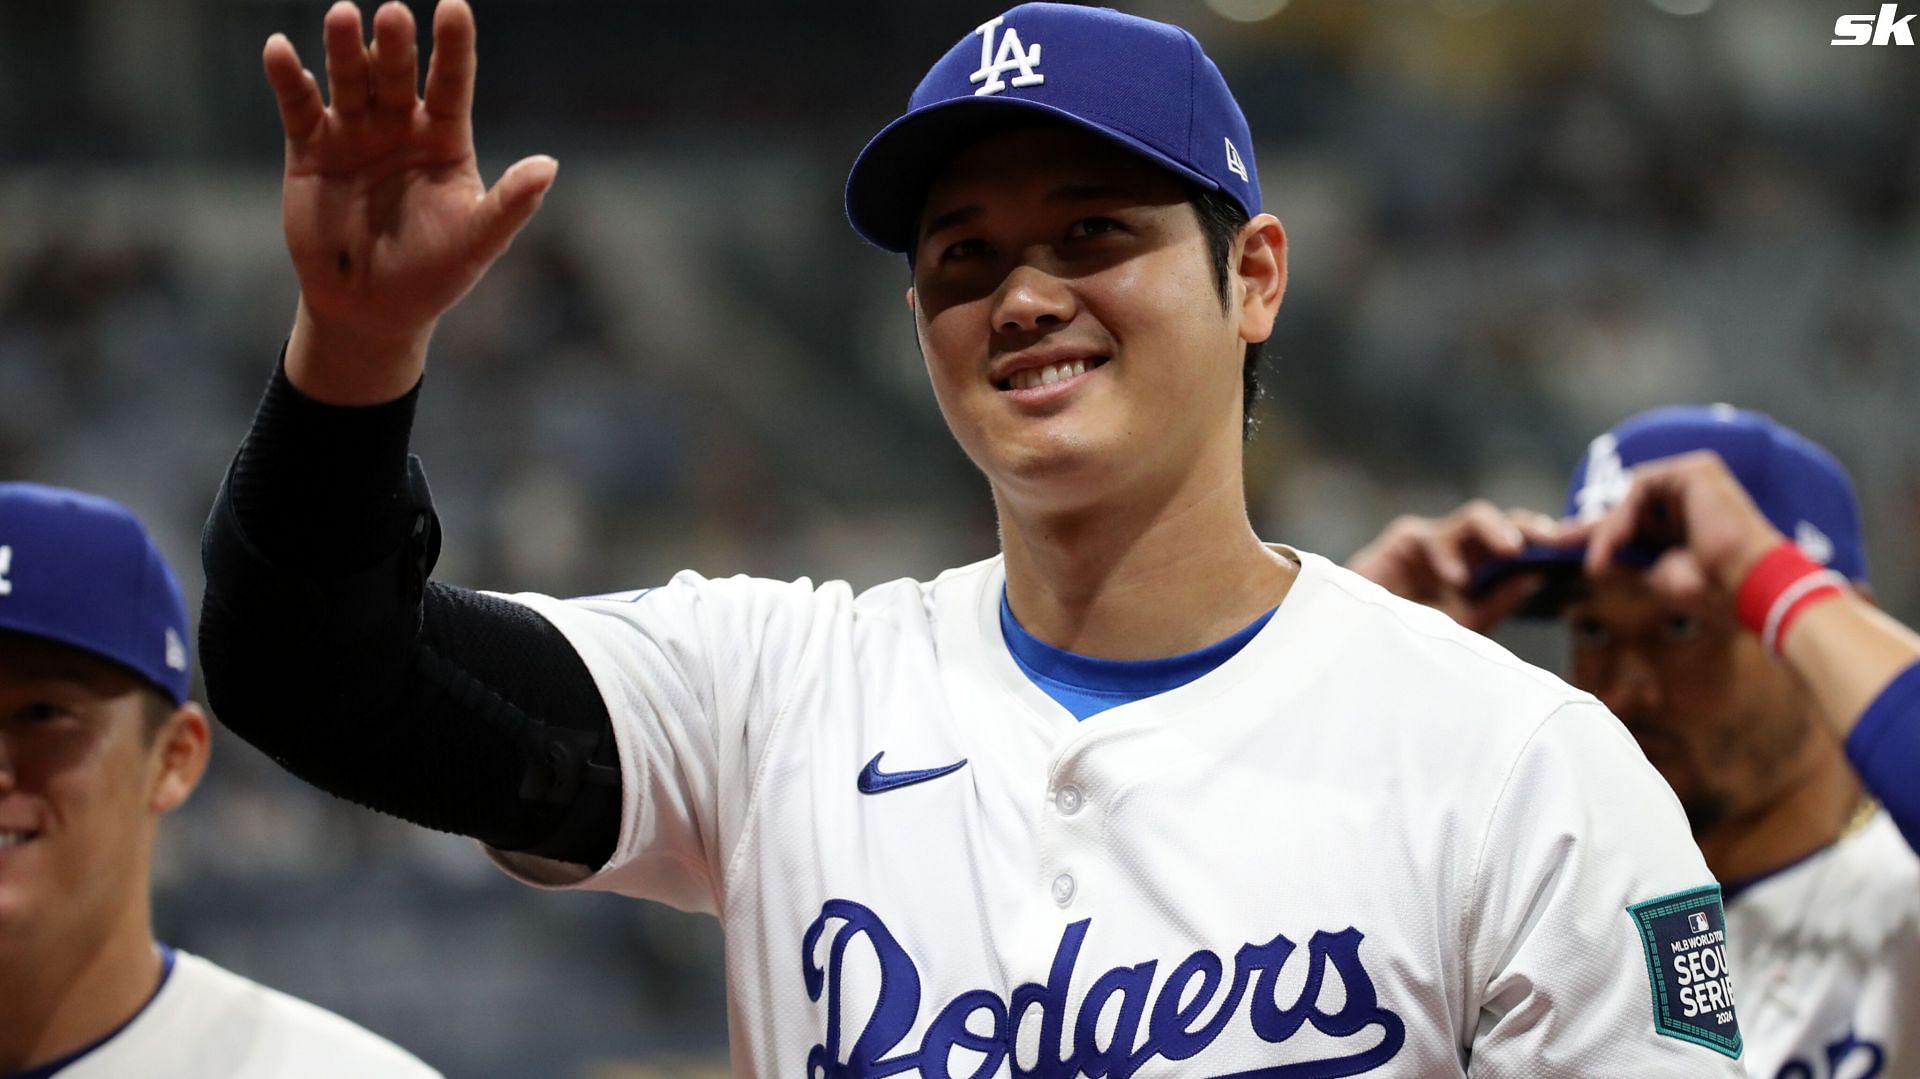 Shohei Ohtani Update: Dodgers superstar set to begin throwing program after Seoul Series, per Dave Roberts